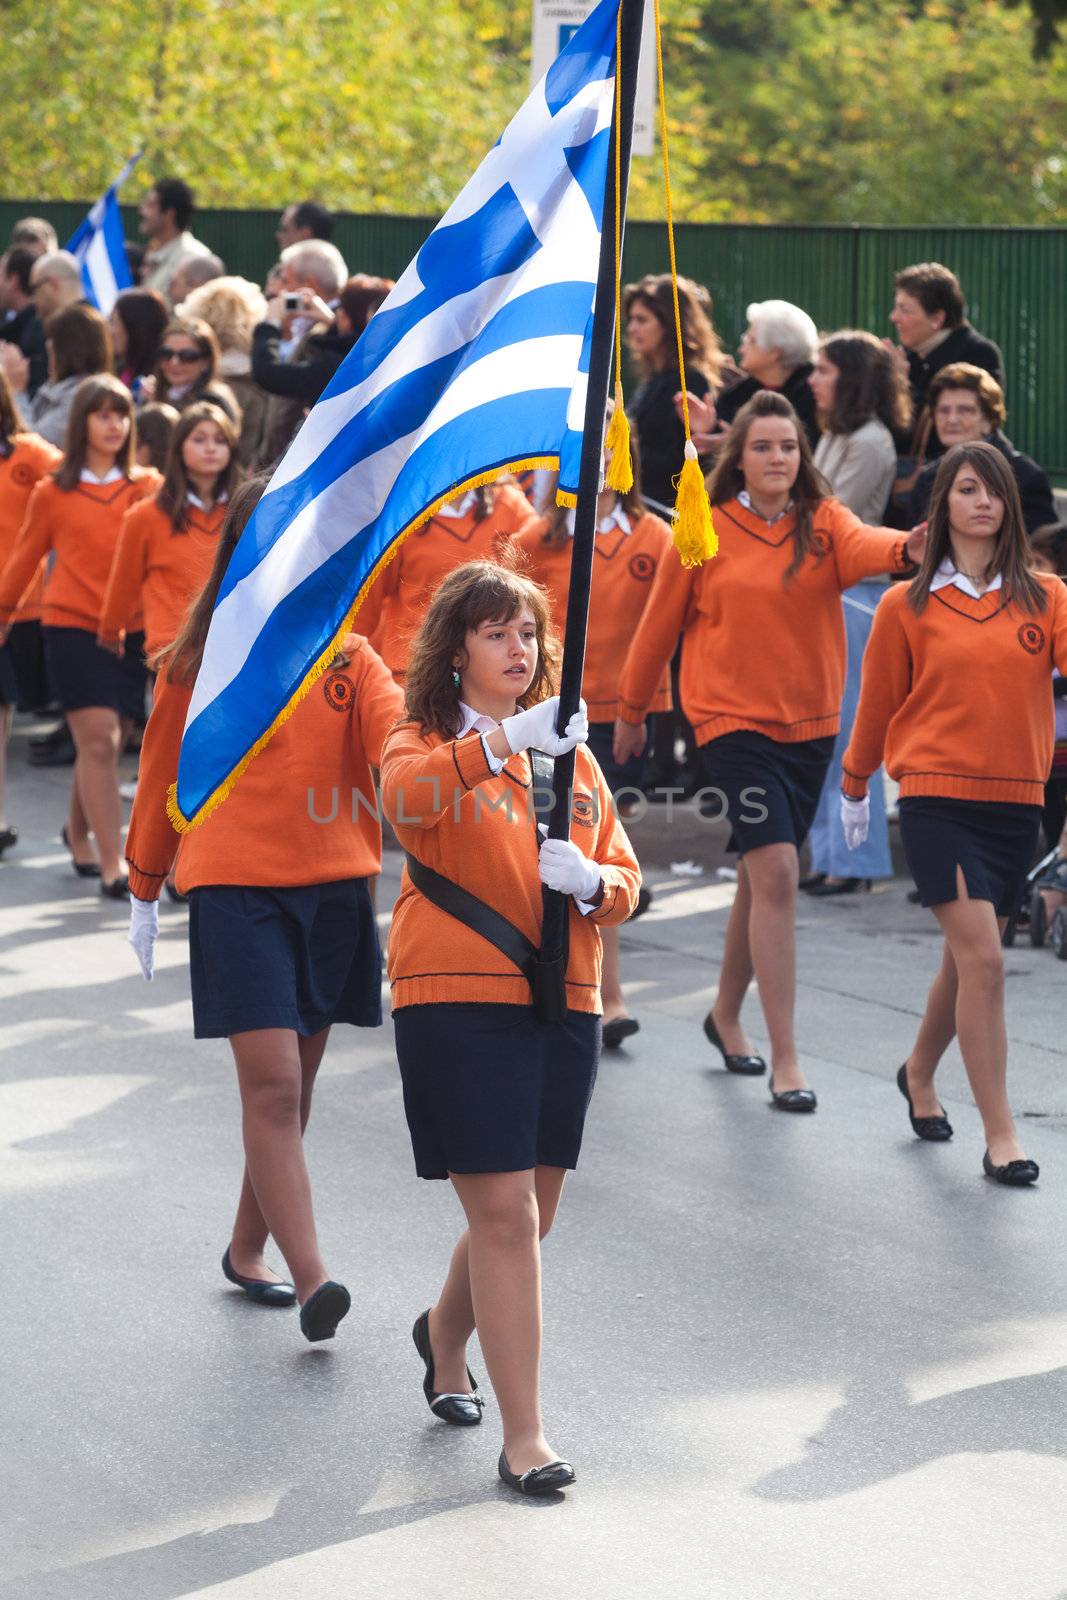 THESSALONIKI, GREECE - OCTOBER 28: Parade to celebrate the anniversary of 1940 which was the military conflict between Greece and Italy.Children holding Greek flags on October 28, 2011 in Thessaloniki